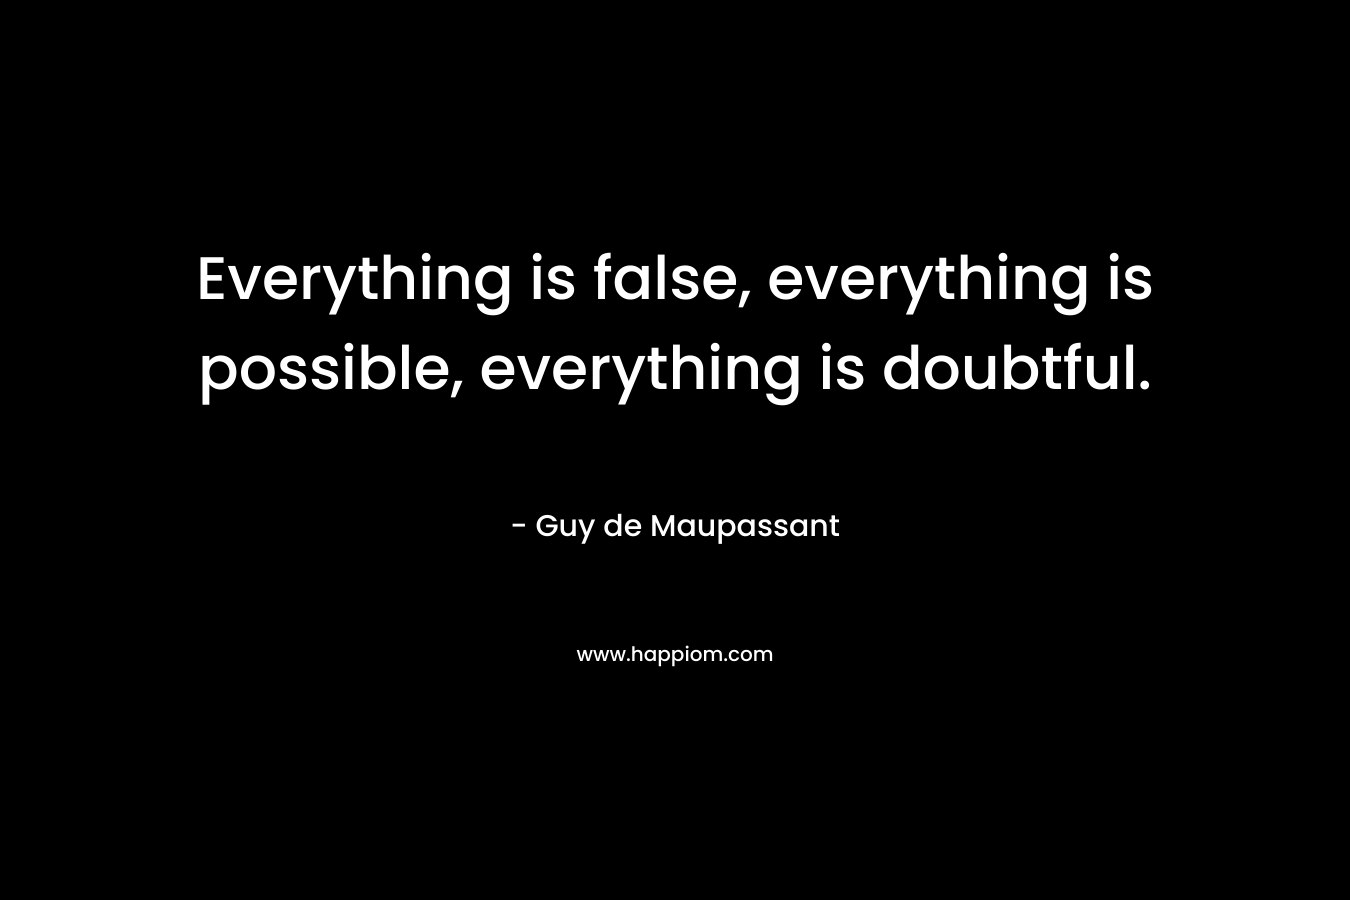 Everything is false, everything is possible, everything is doubtful. – Guy de Maupassant